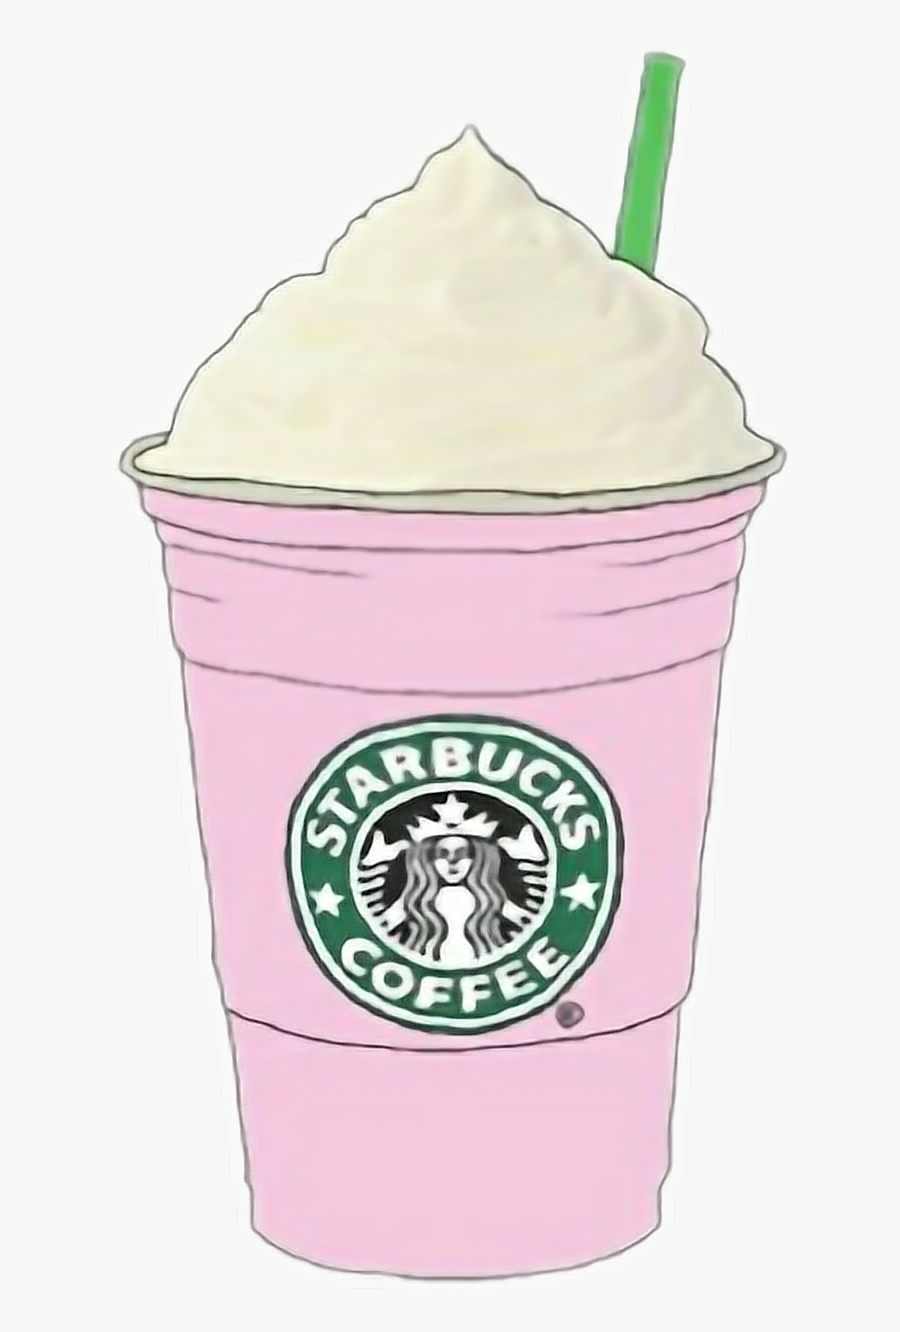 #starbucks #coffee #cafe #rosa #pink #tumblr - Starbucks Cotton Candy Frappuccino Png, Transparent Clipart